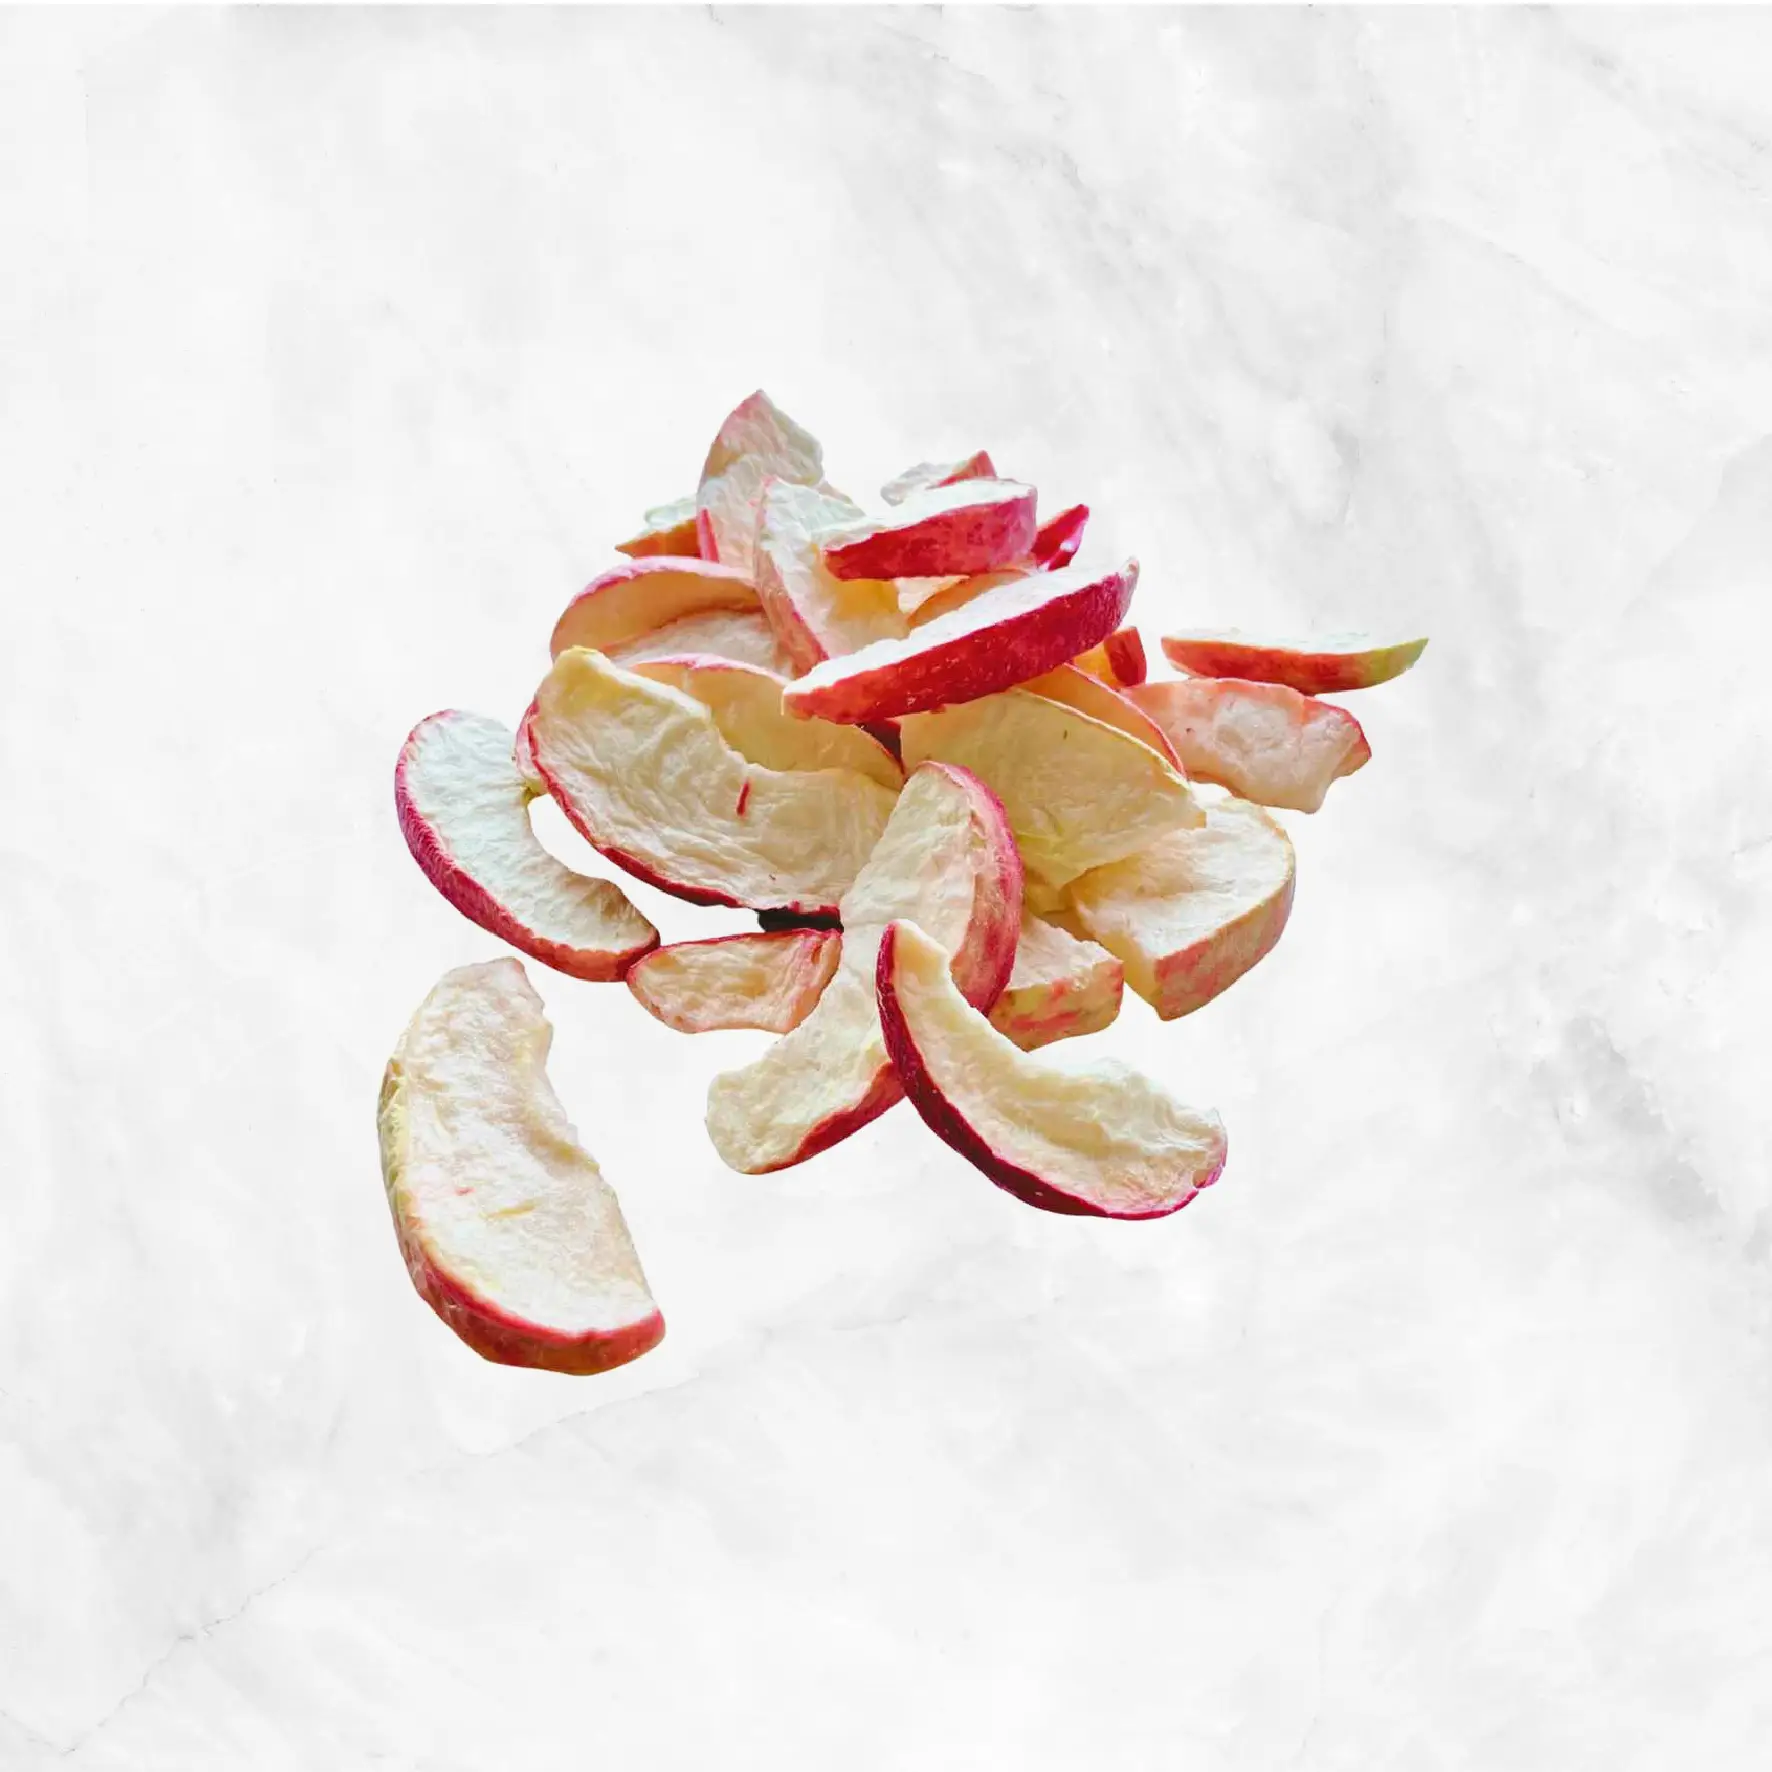 Organic Freeze - Dried Apples Delivery